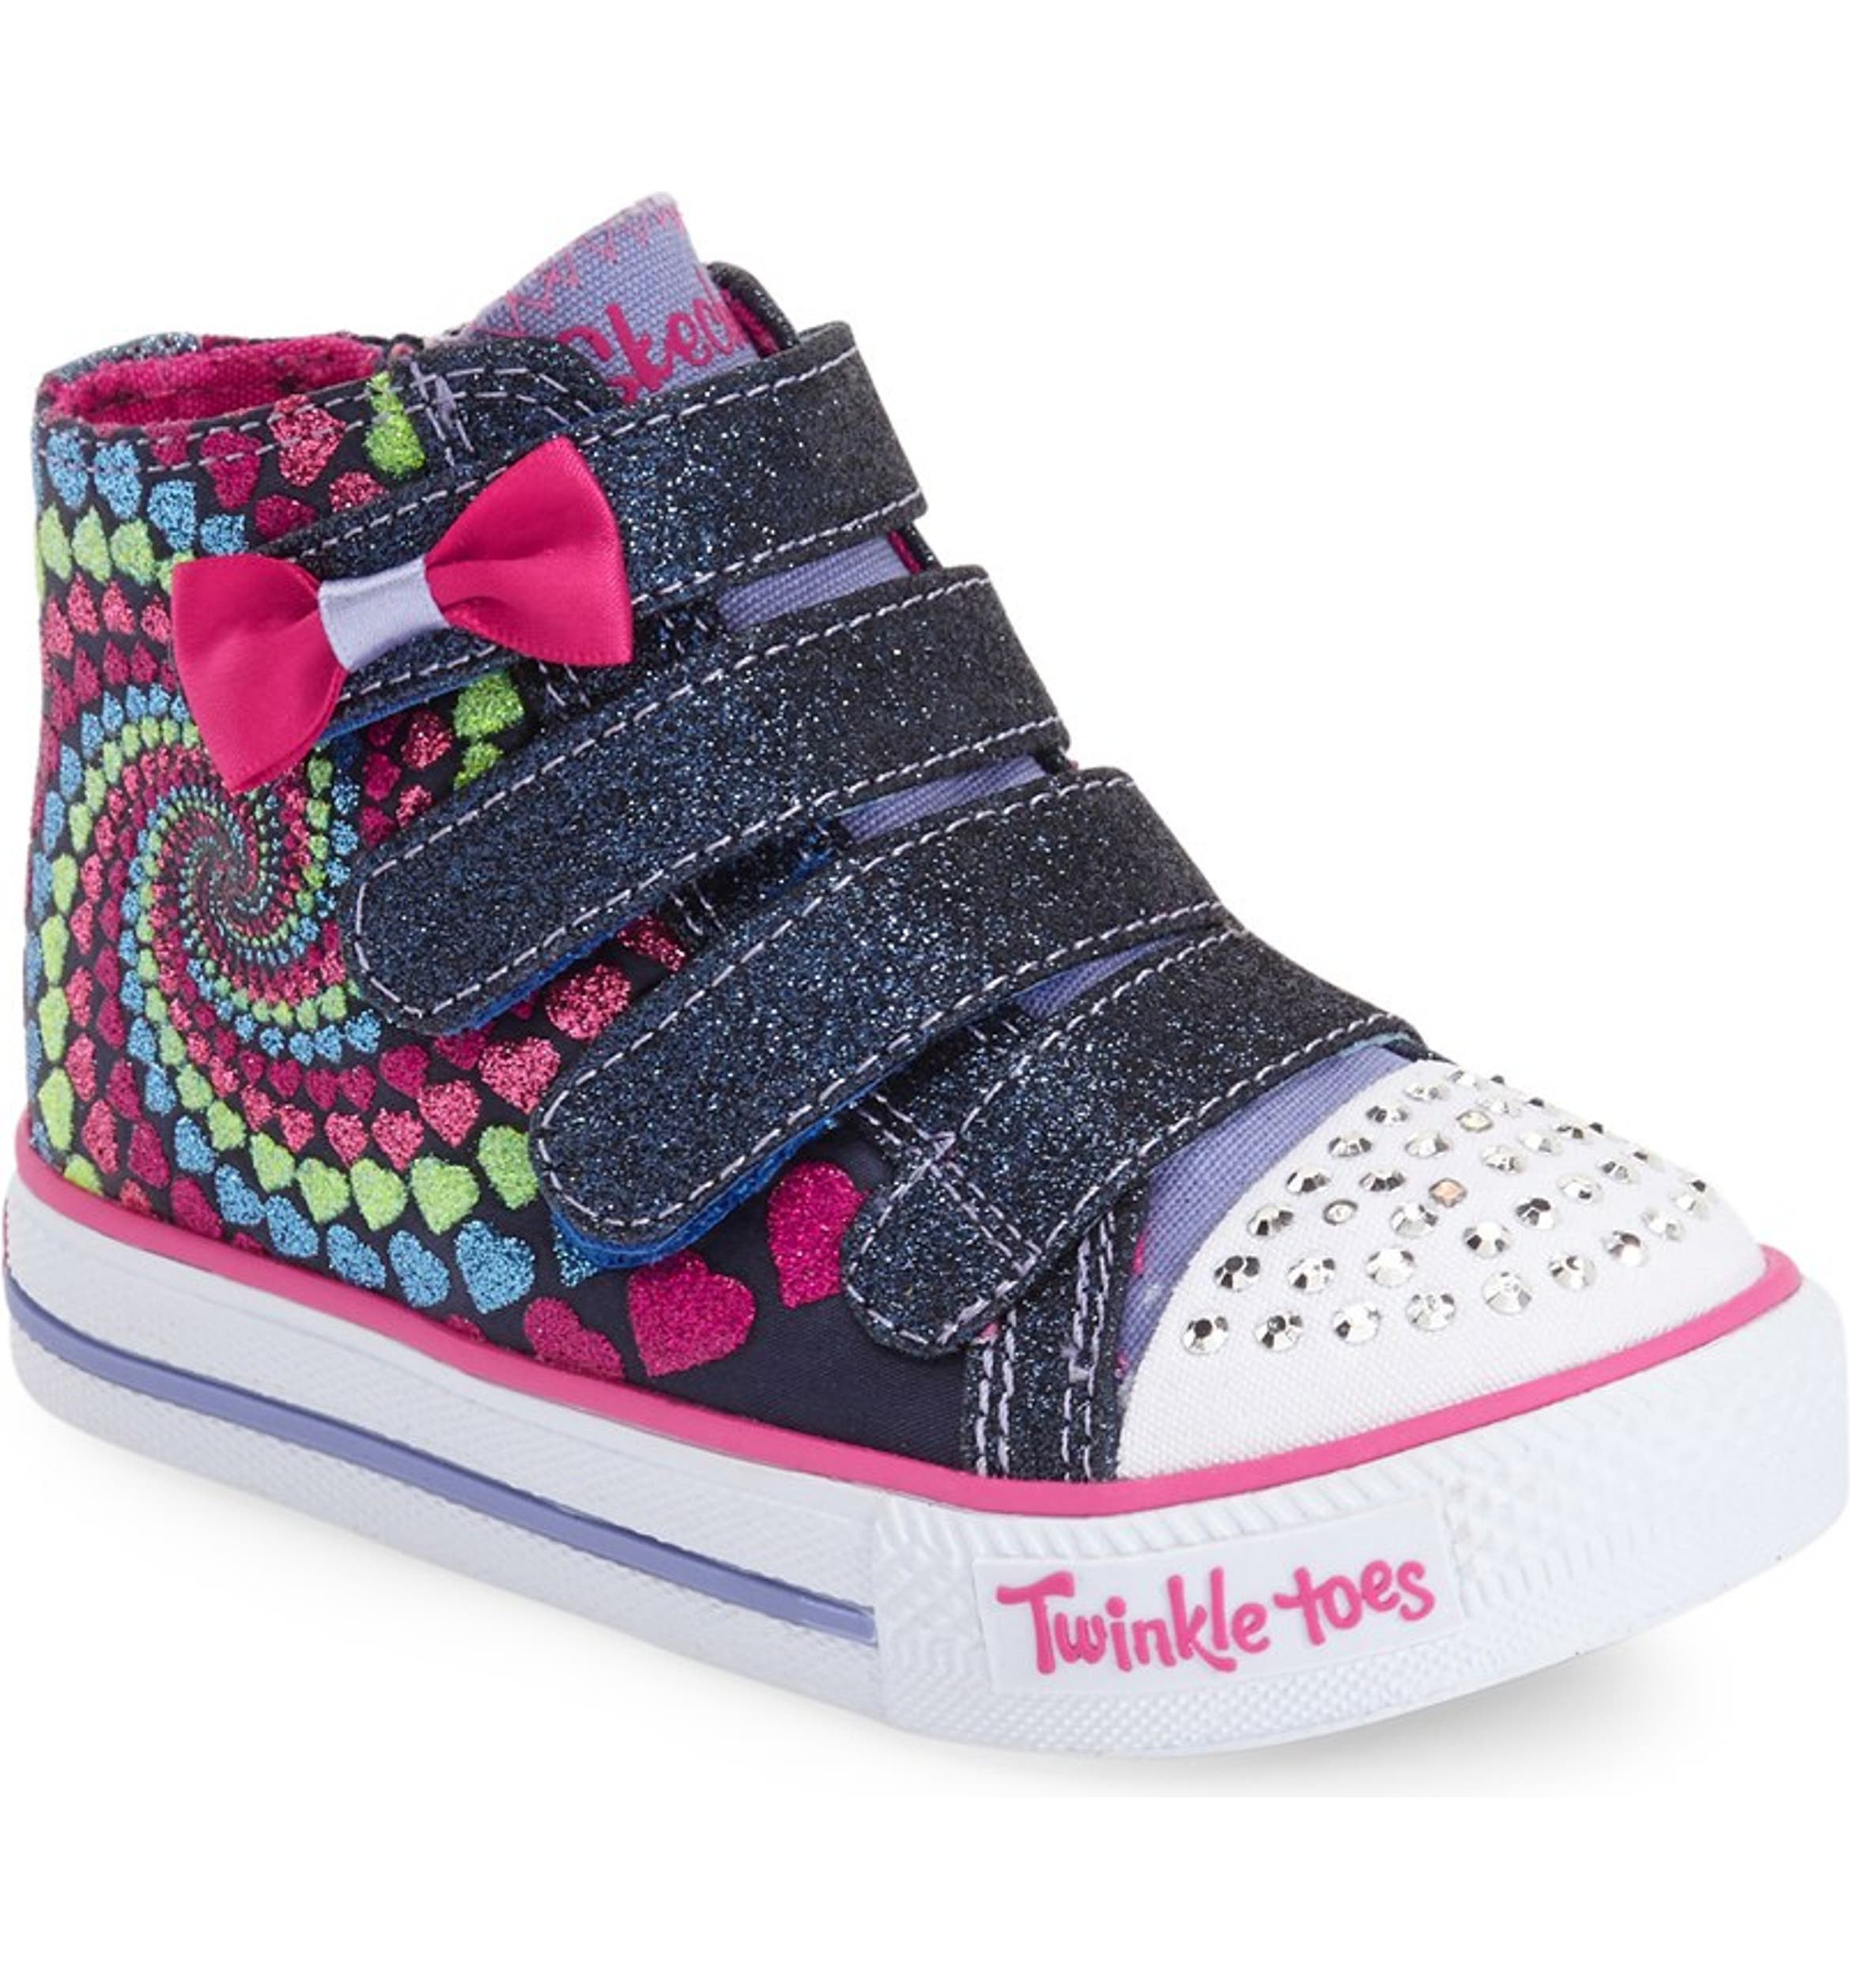 SKECHERS 'Twinkle Toes - Shuffles Lil Skippers' Light-Up High Top ...